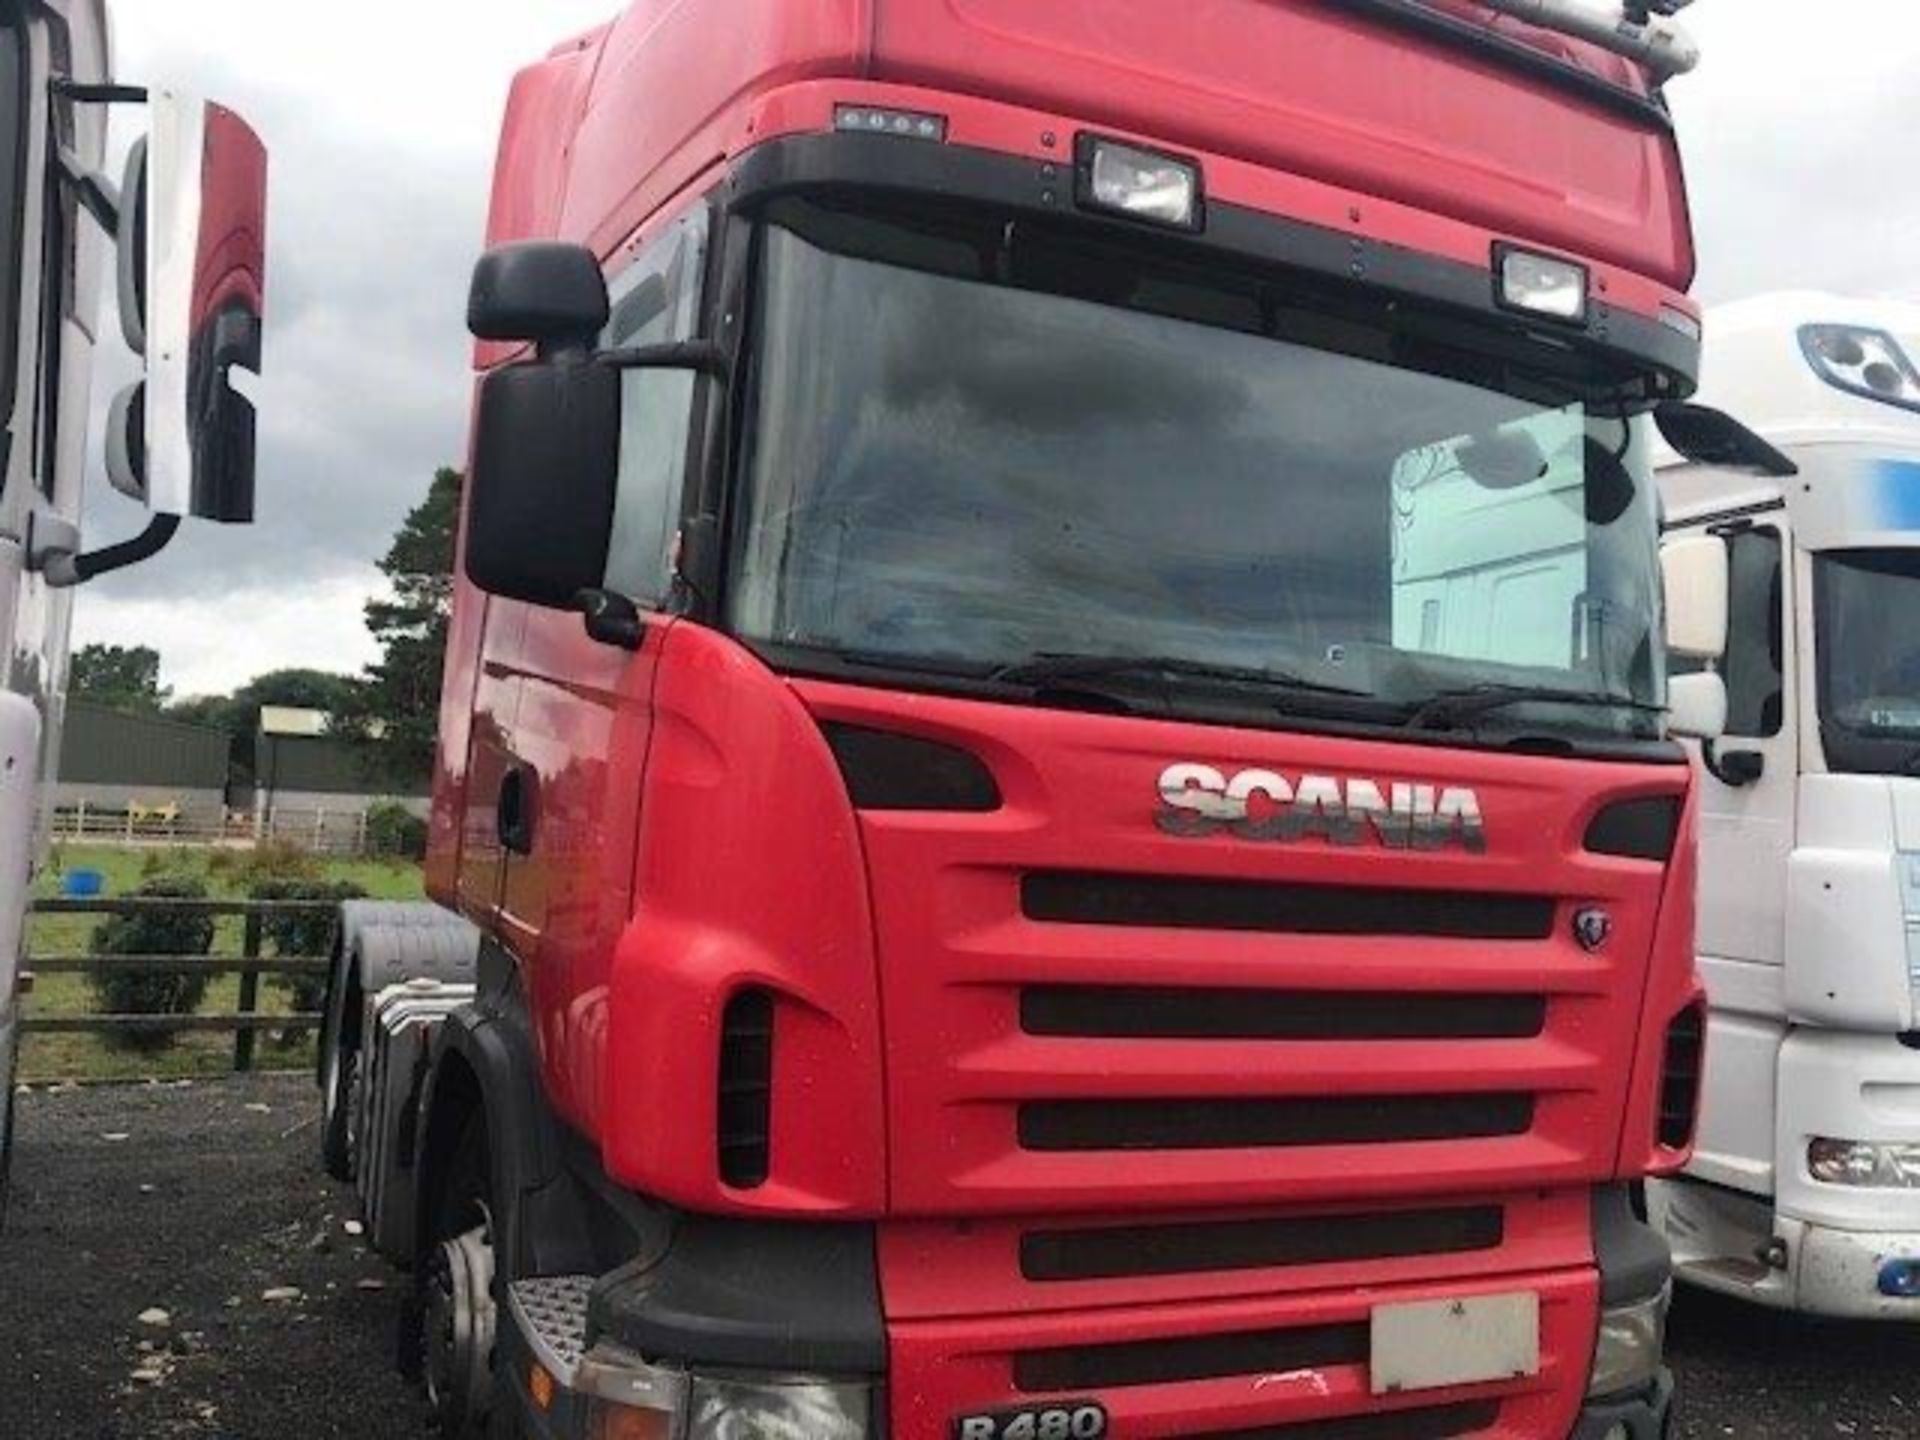 2009 Scania R480 - Image 2 of 4